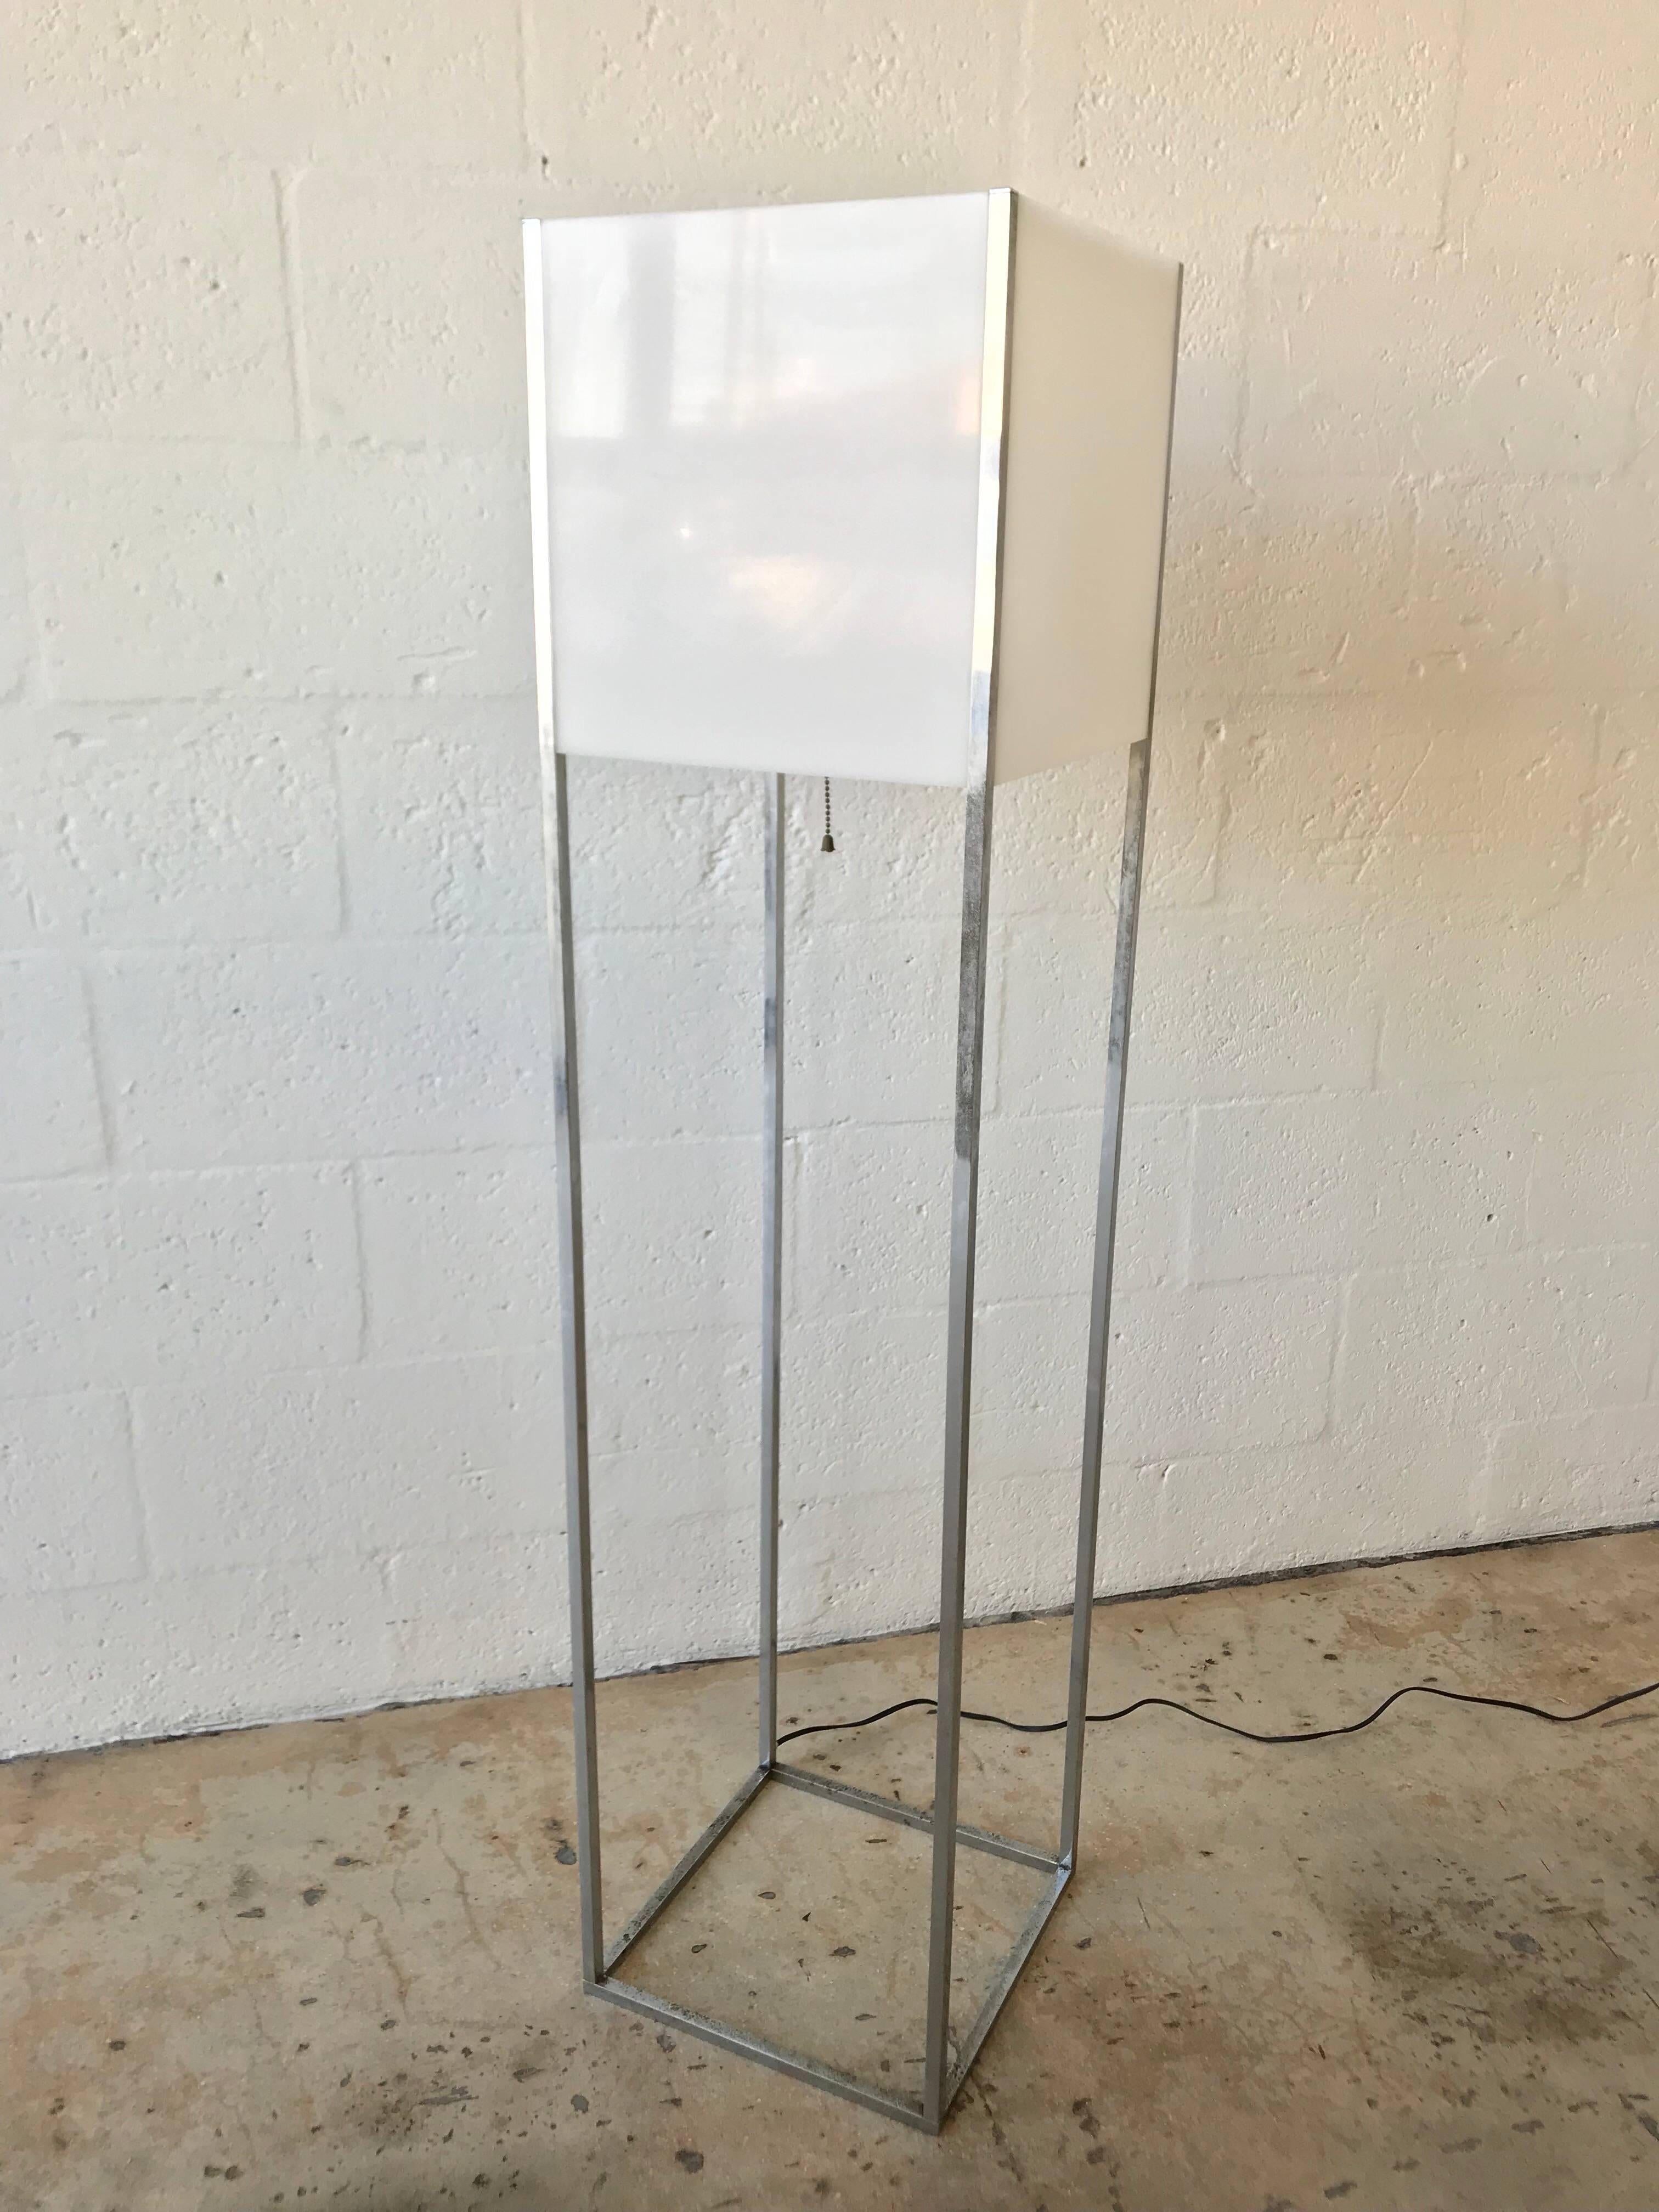 Mid-Century Modern chrome and Lucite floor lamp designed by Paul Mayen for Habitat. Square outlined boxed chrome frame with integrated square white lucite, persplex, plexiglass shade, single bulb with center pull cord.